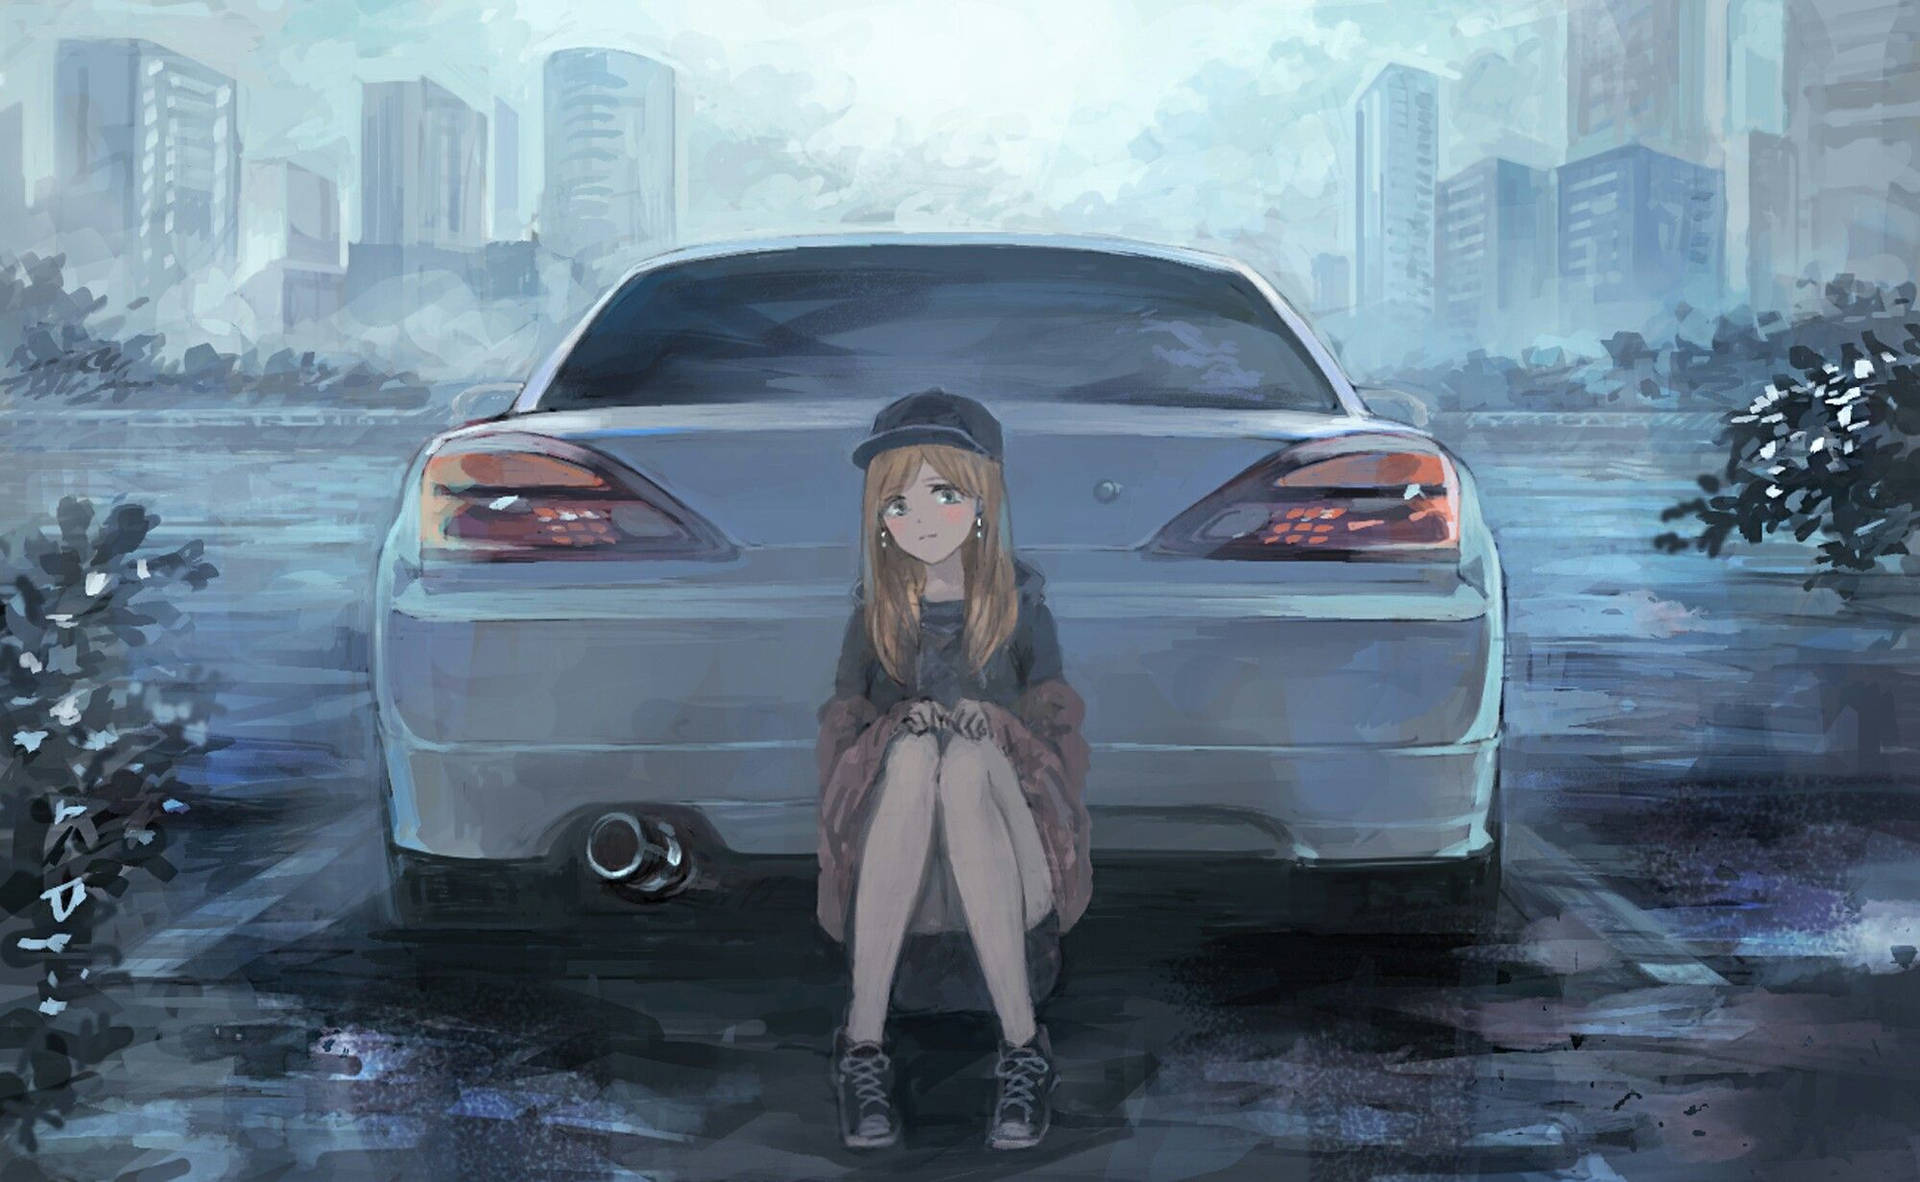 Free Car Anime Wallpaper Downloads, [100+] Car Anime Wallpapers for FREE |  